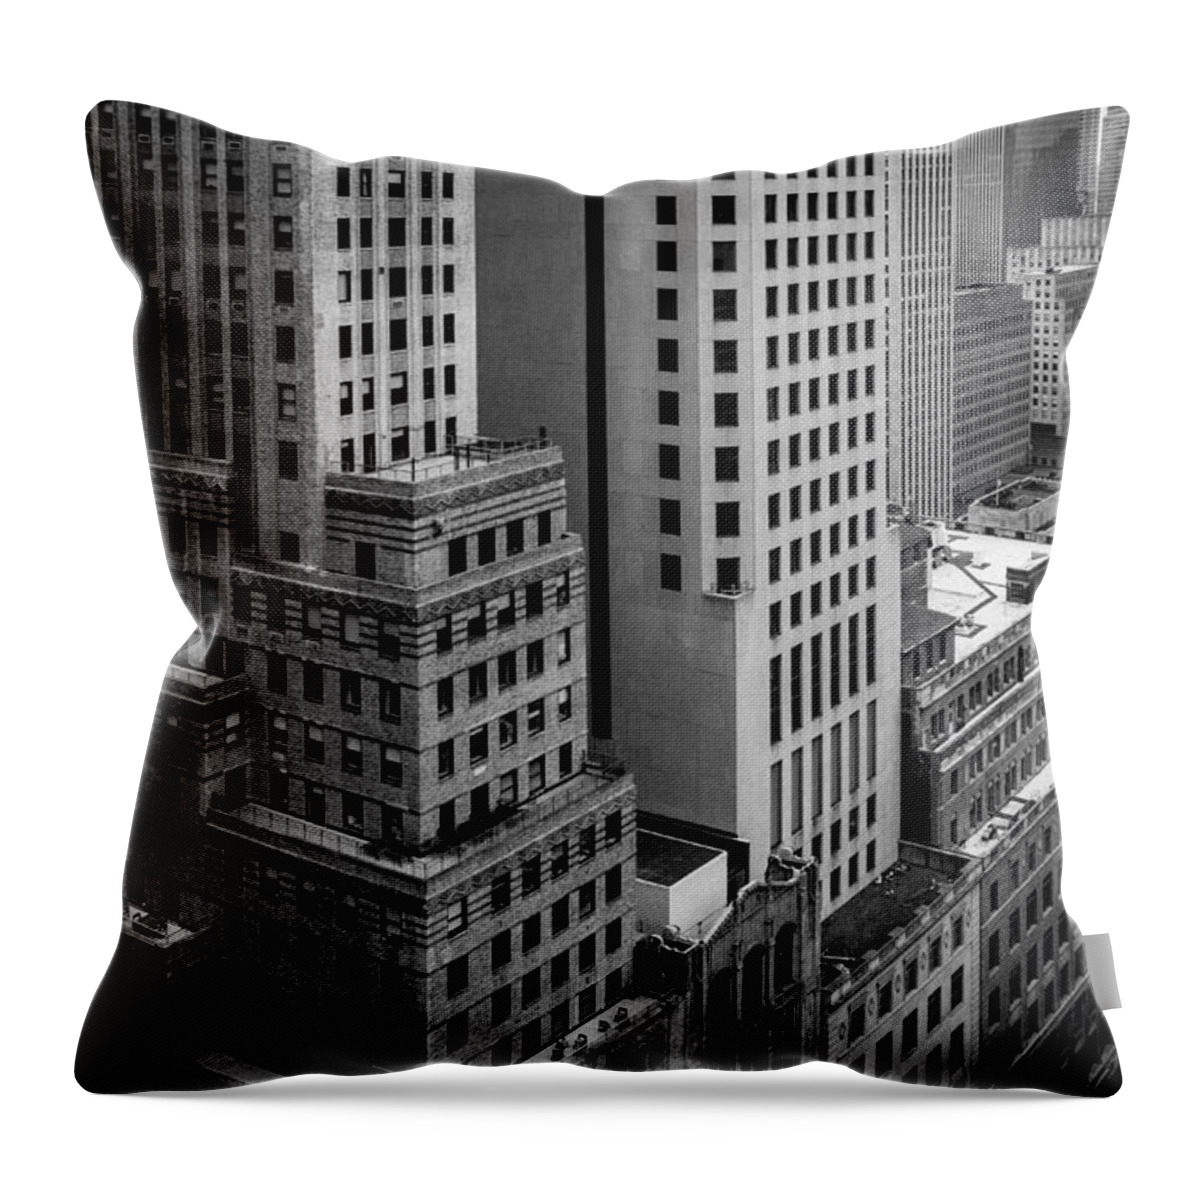 Metro City Throw Pillow featuring the photograph Metro City by M G Whittingham